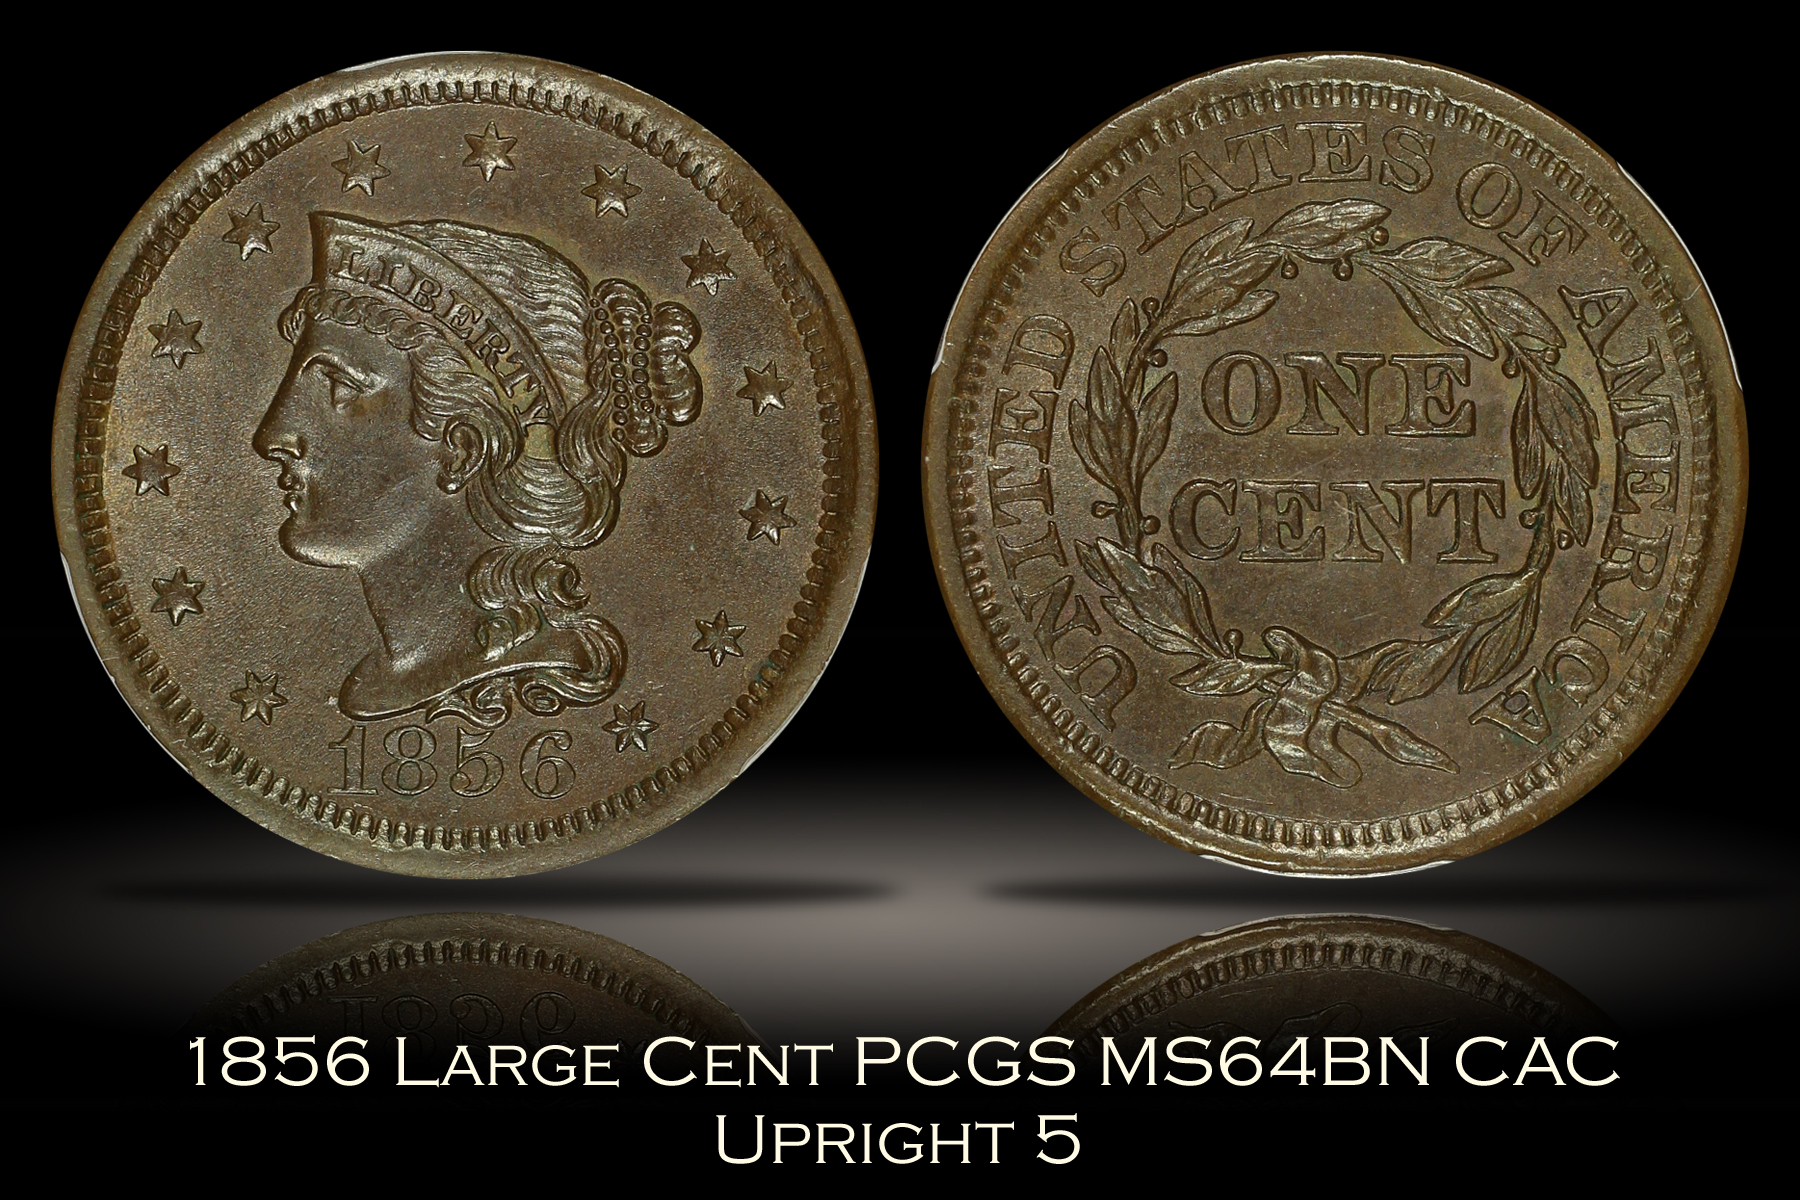 1856 Large Cent PCGS MS64BN CAC